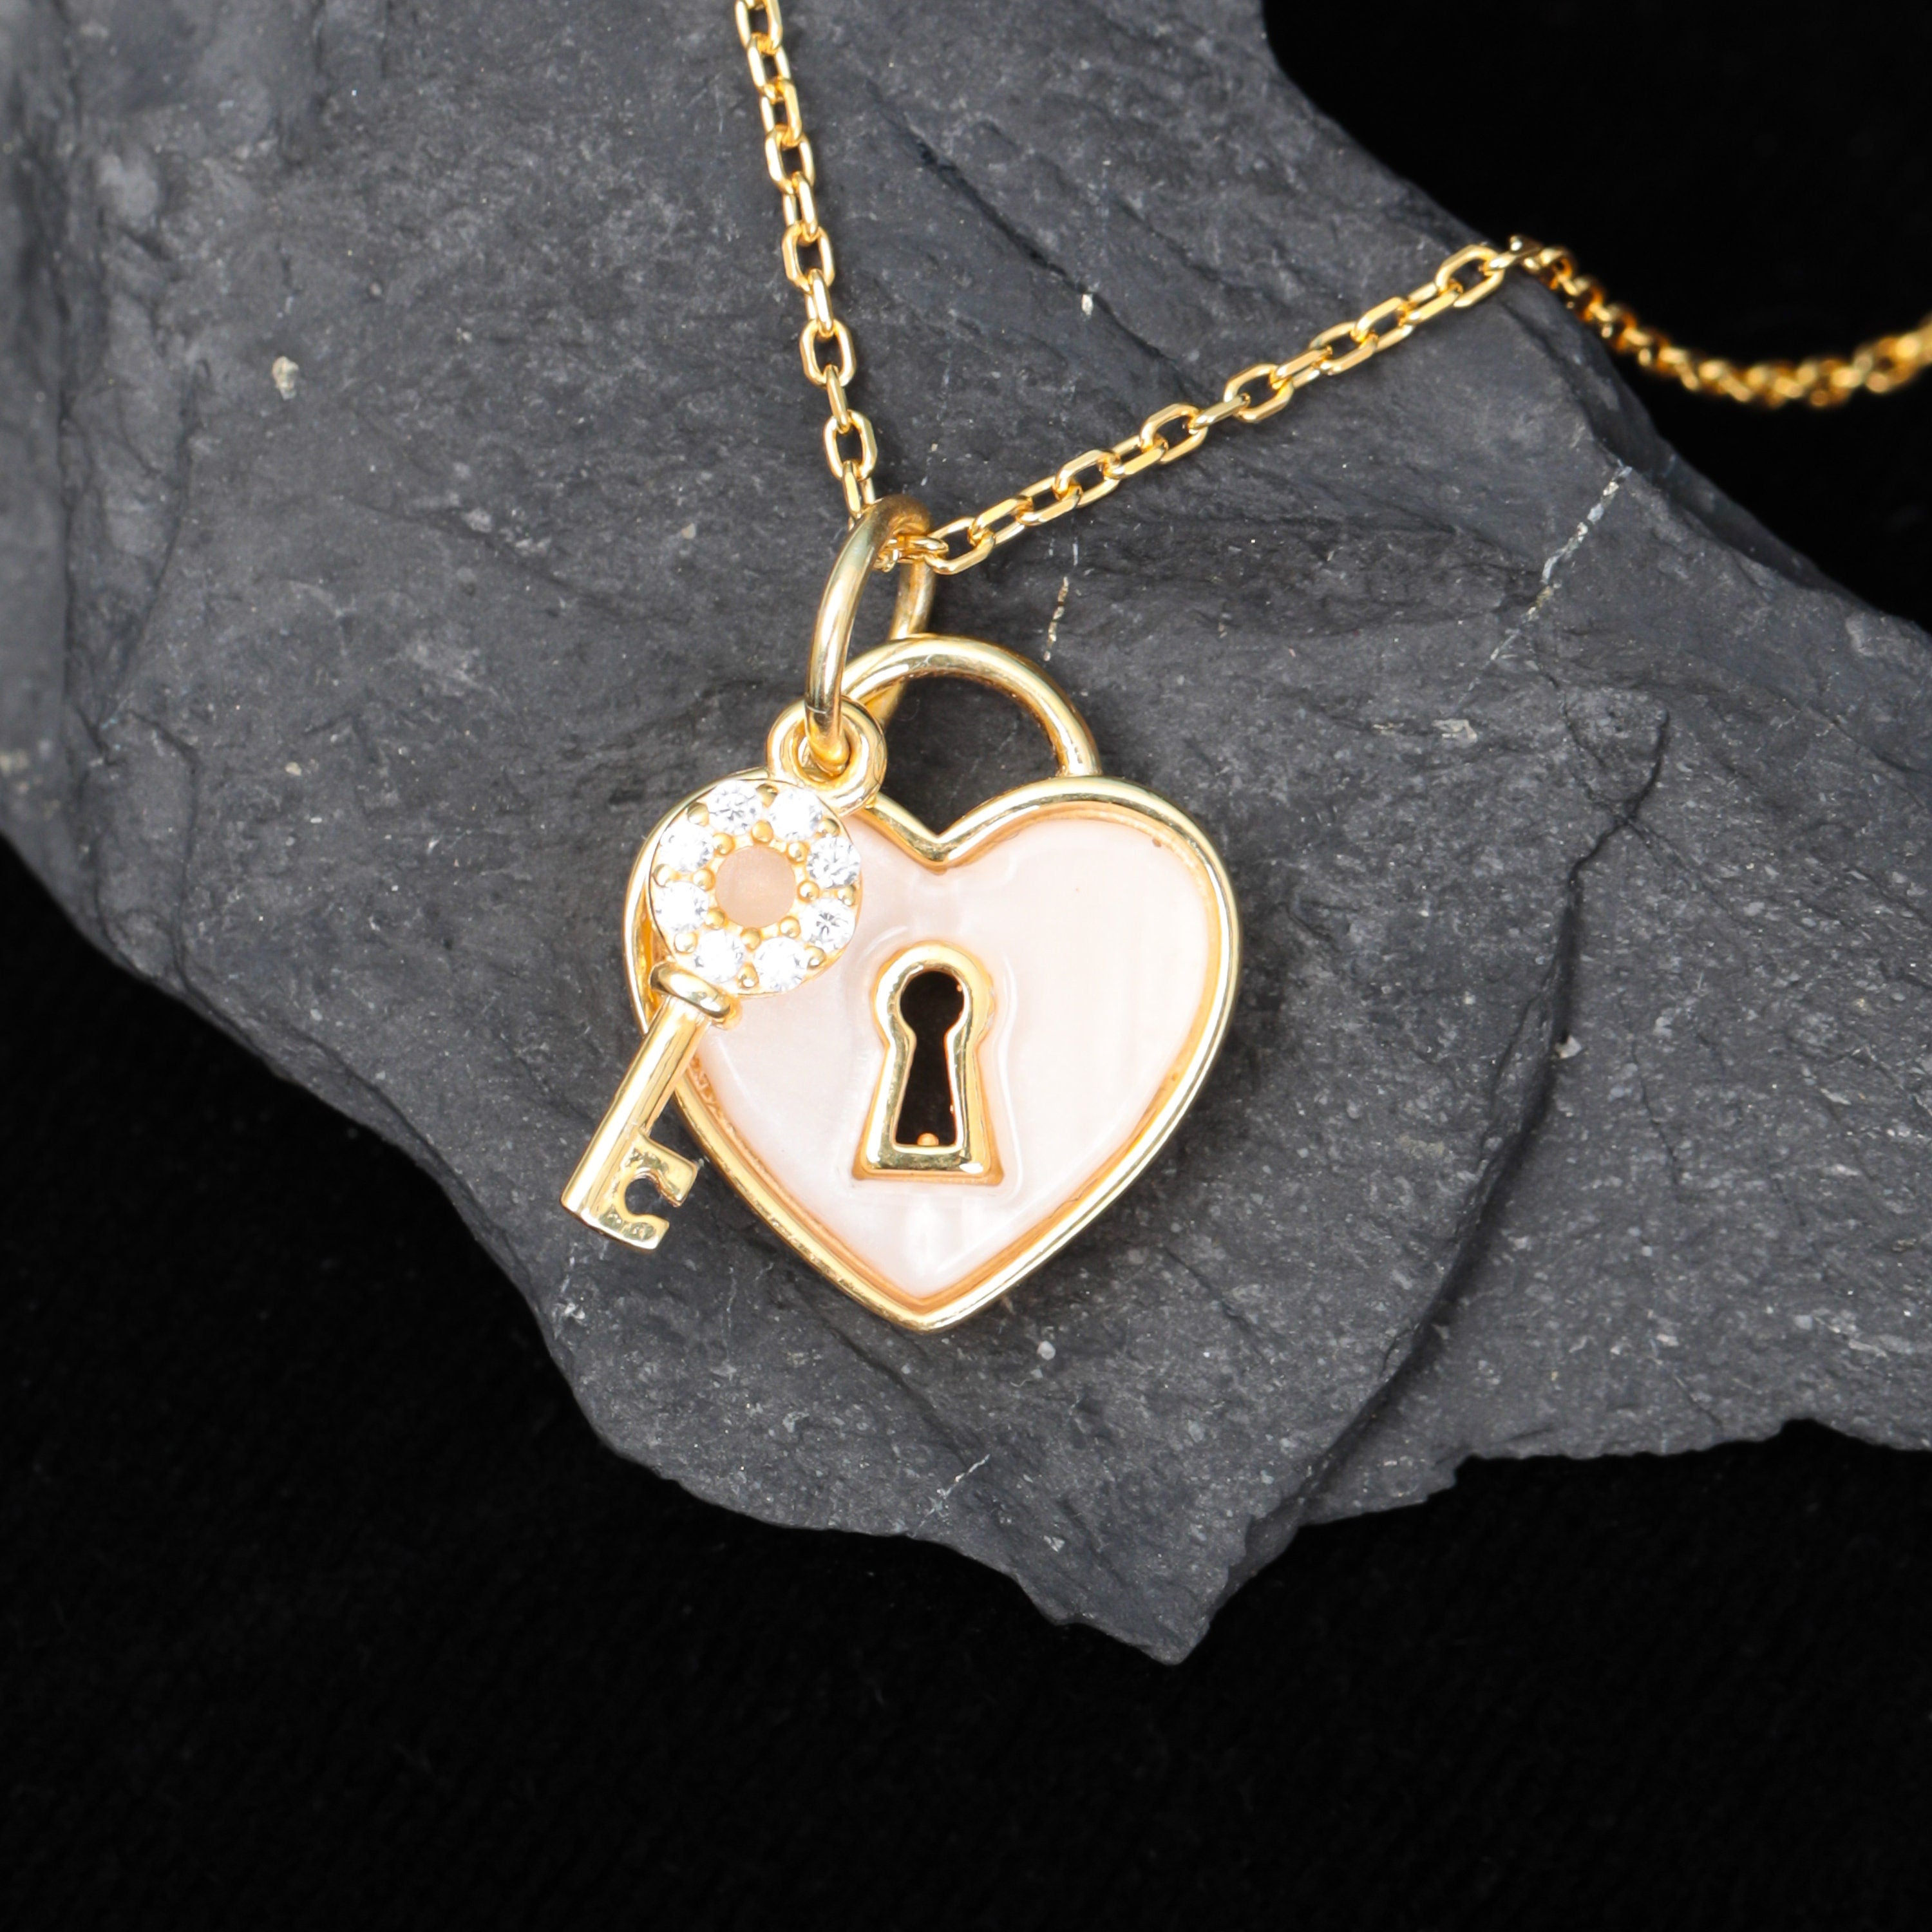 Uniqon Valentine's Day Special Metal Heart Design Lock And Key Romantic  Keepsake Padlock Diamond Nug Key Lock Love Couple Beautiful Duo Pendant  Locket Necklace With Chain For Boy's And Girl's : Amazon.in: